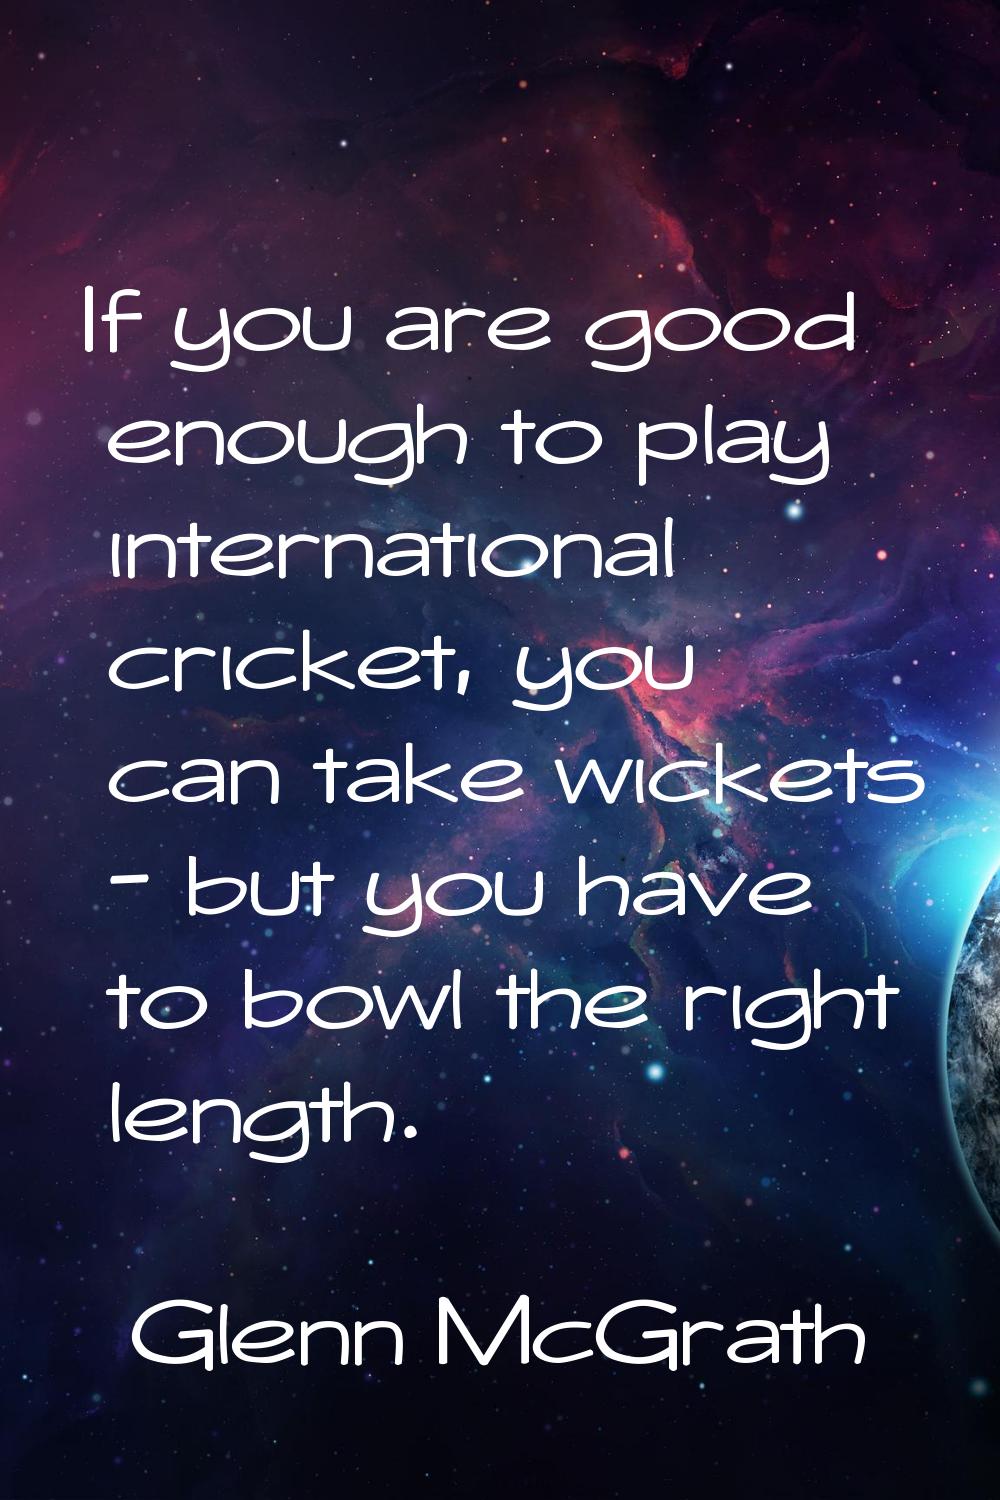 If you are good enough to play international cricket, you can take wickets - but you have to bowl t